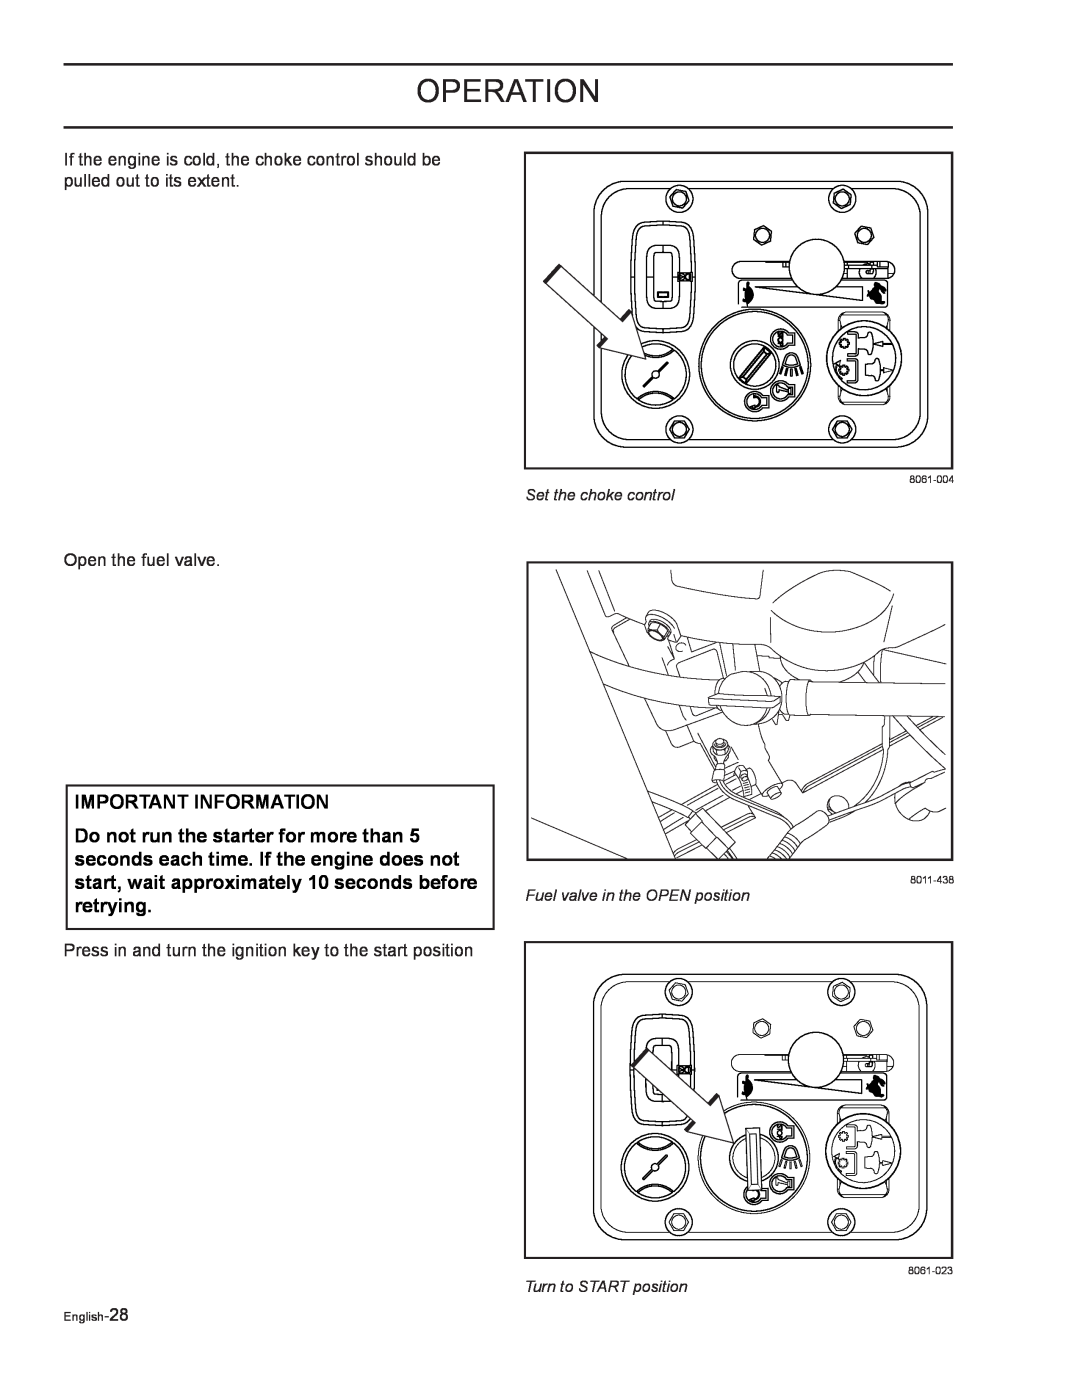 Yazoo/Kees ZELKH72270 operation, Important Information, Set the choke control, Fuel valve in the OPEN position, 8061-004 